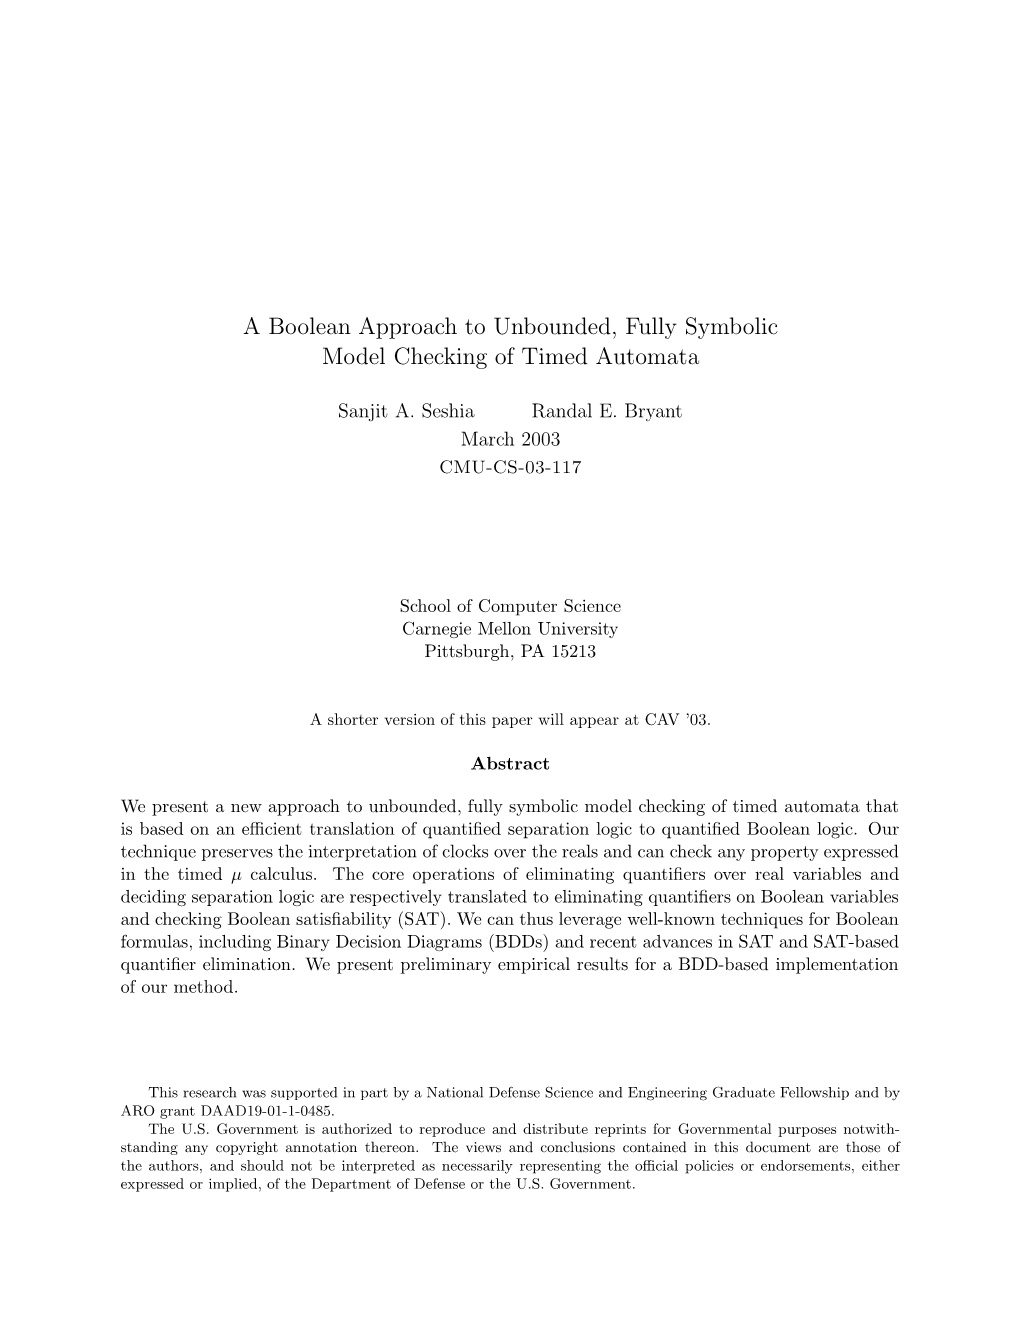 A Boolean Approach to Unbounded, Fully Symbolic Model Checking of Timed Automata